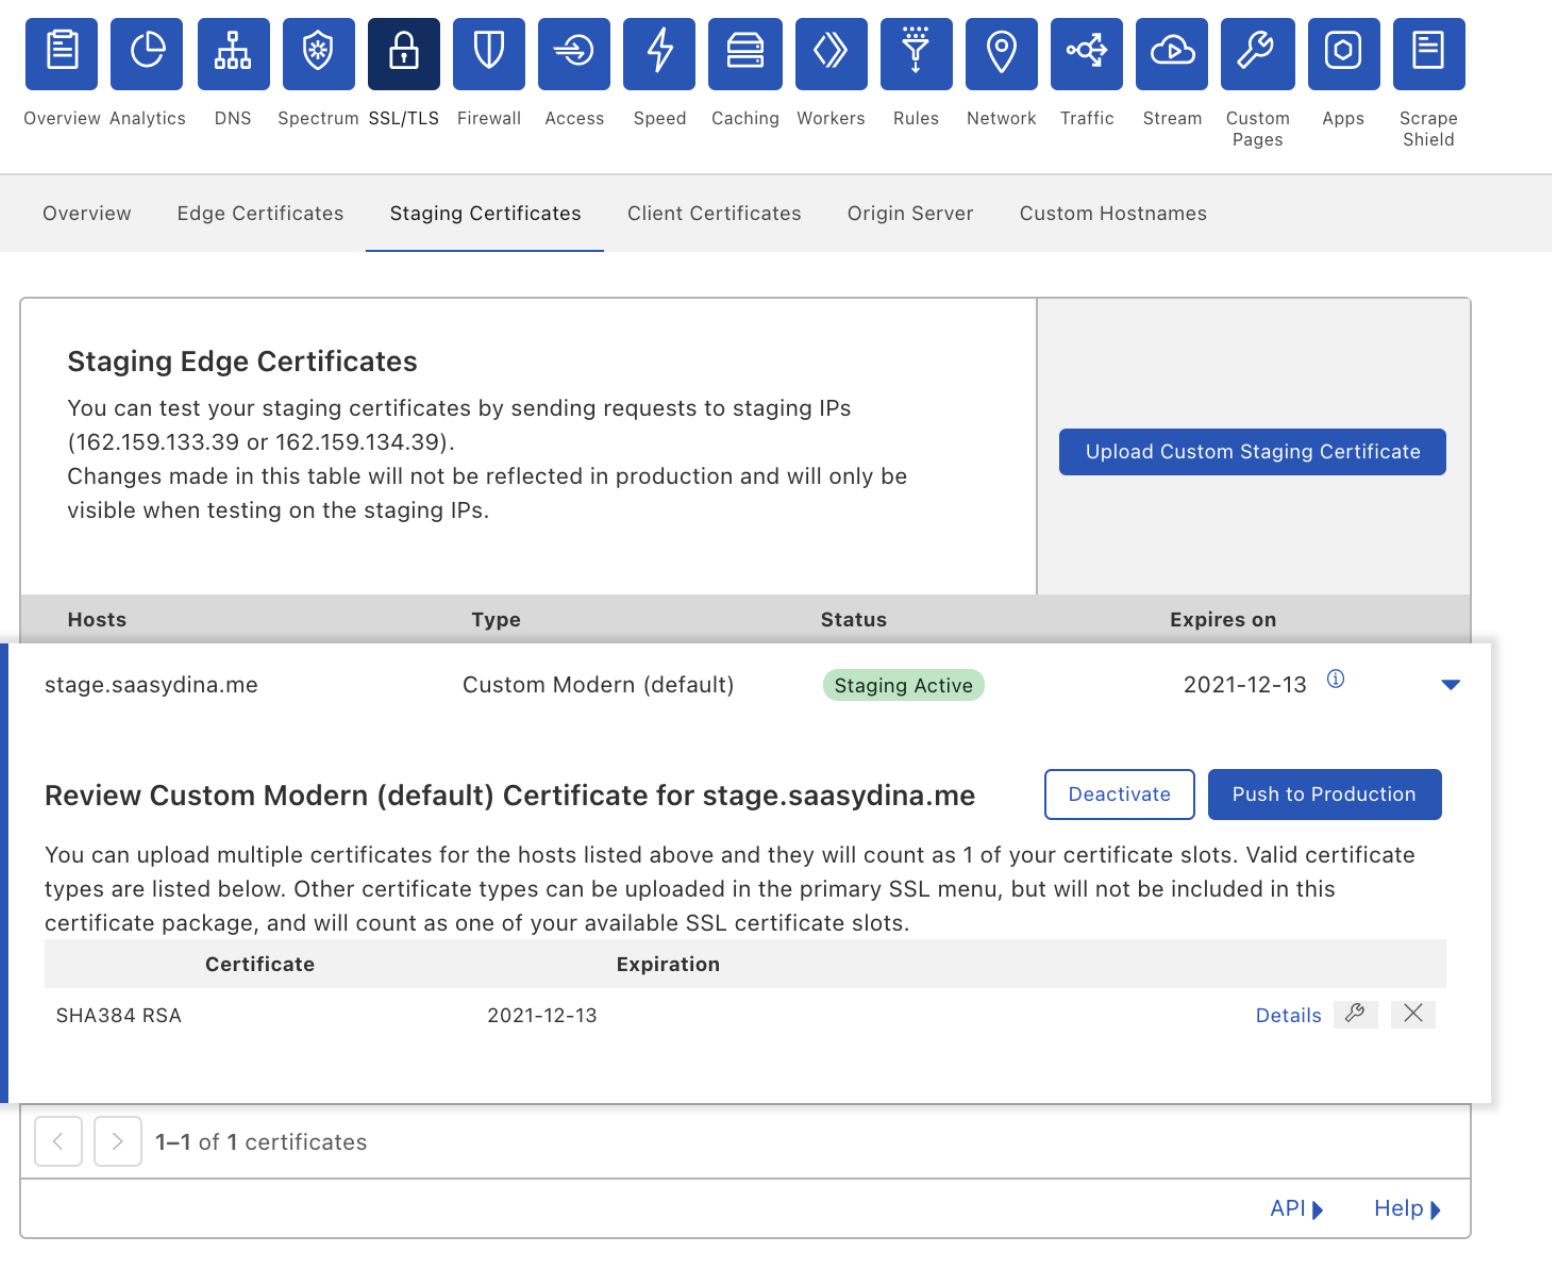 The staging certificates dashboard UI